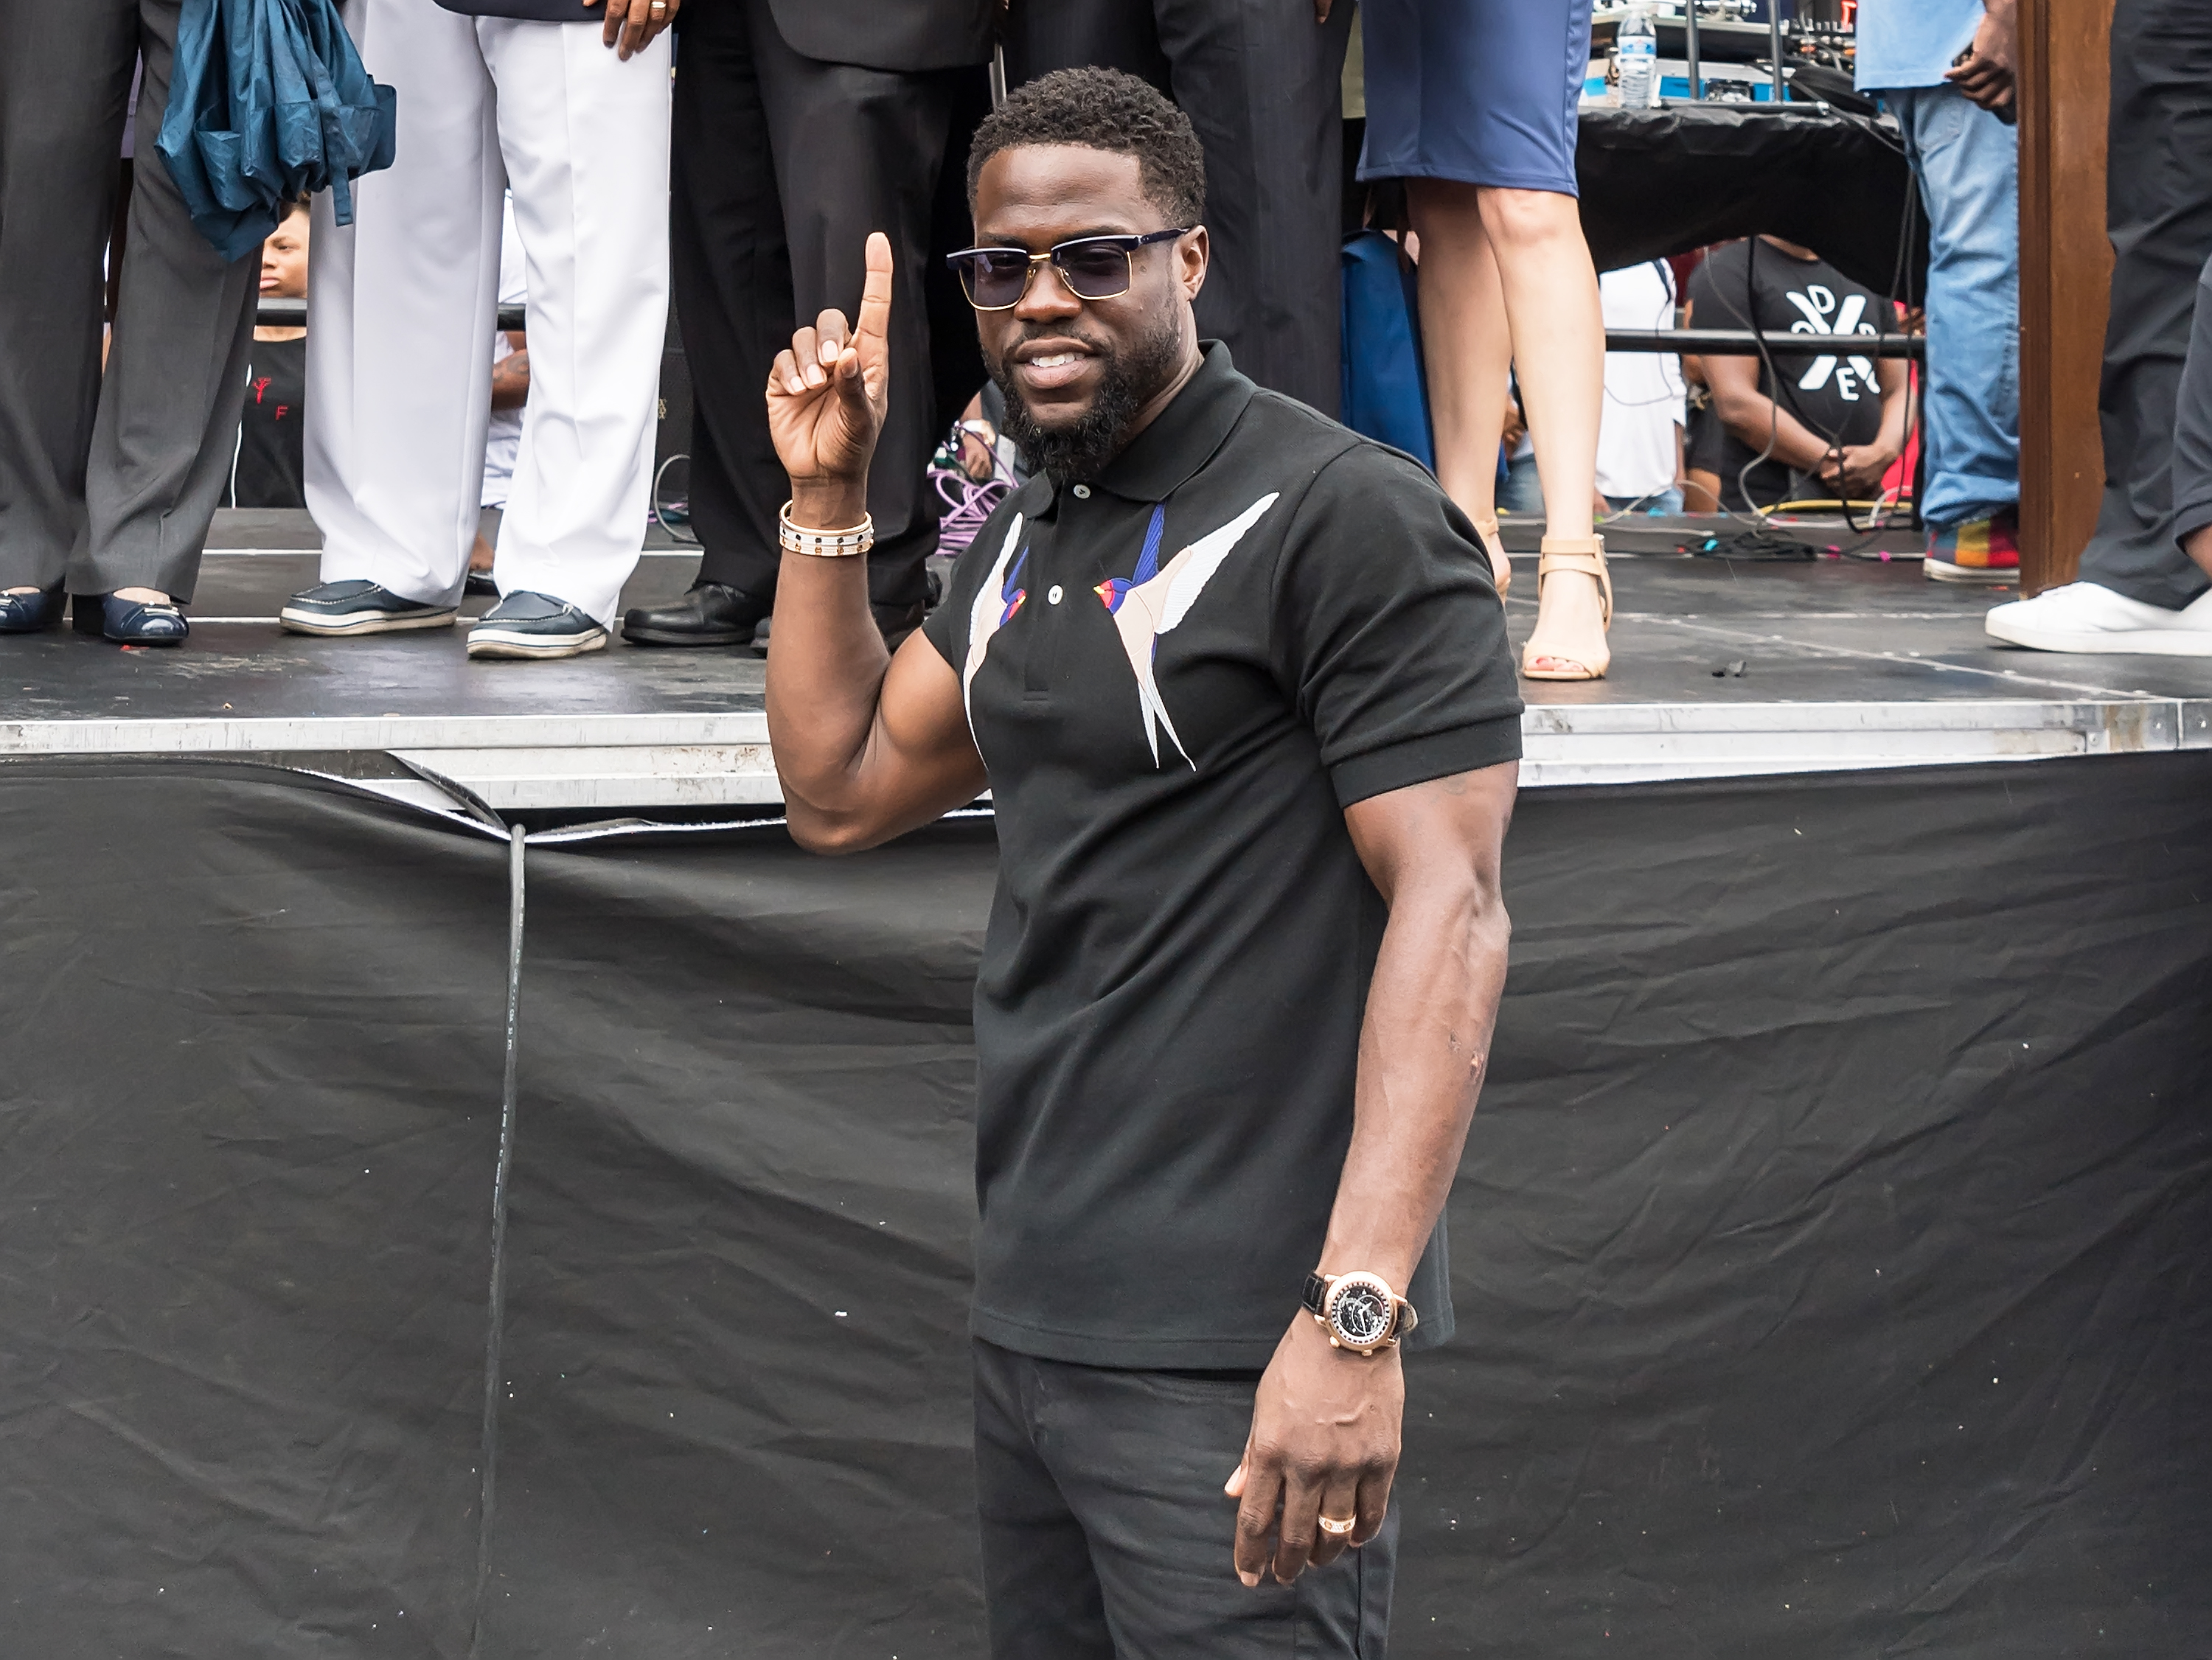 Search Warrants Served In Kevin Hart’s Cheating Scandal Newsone